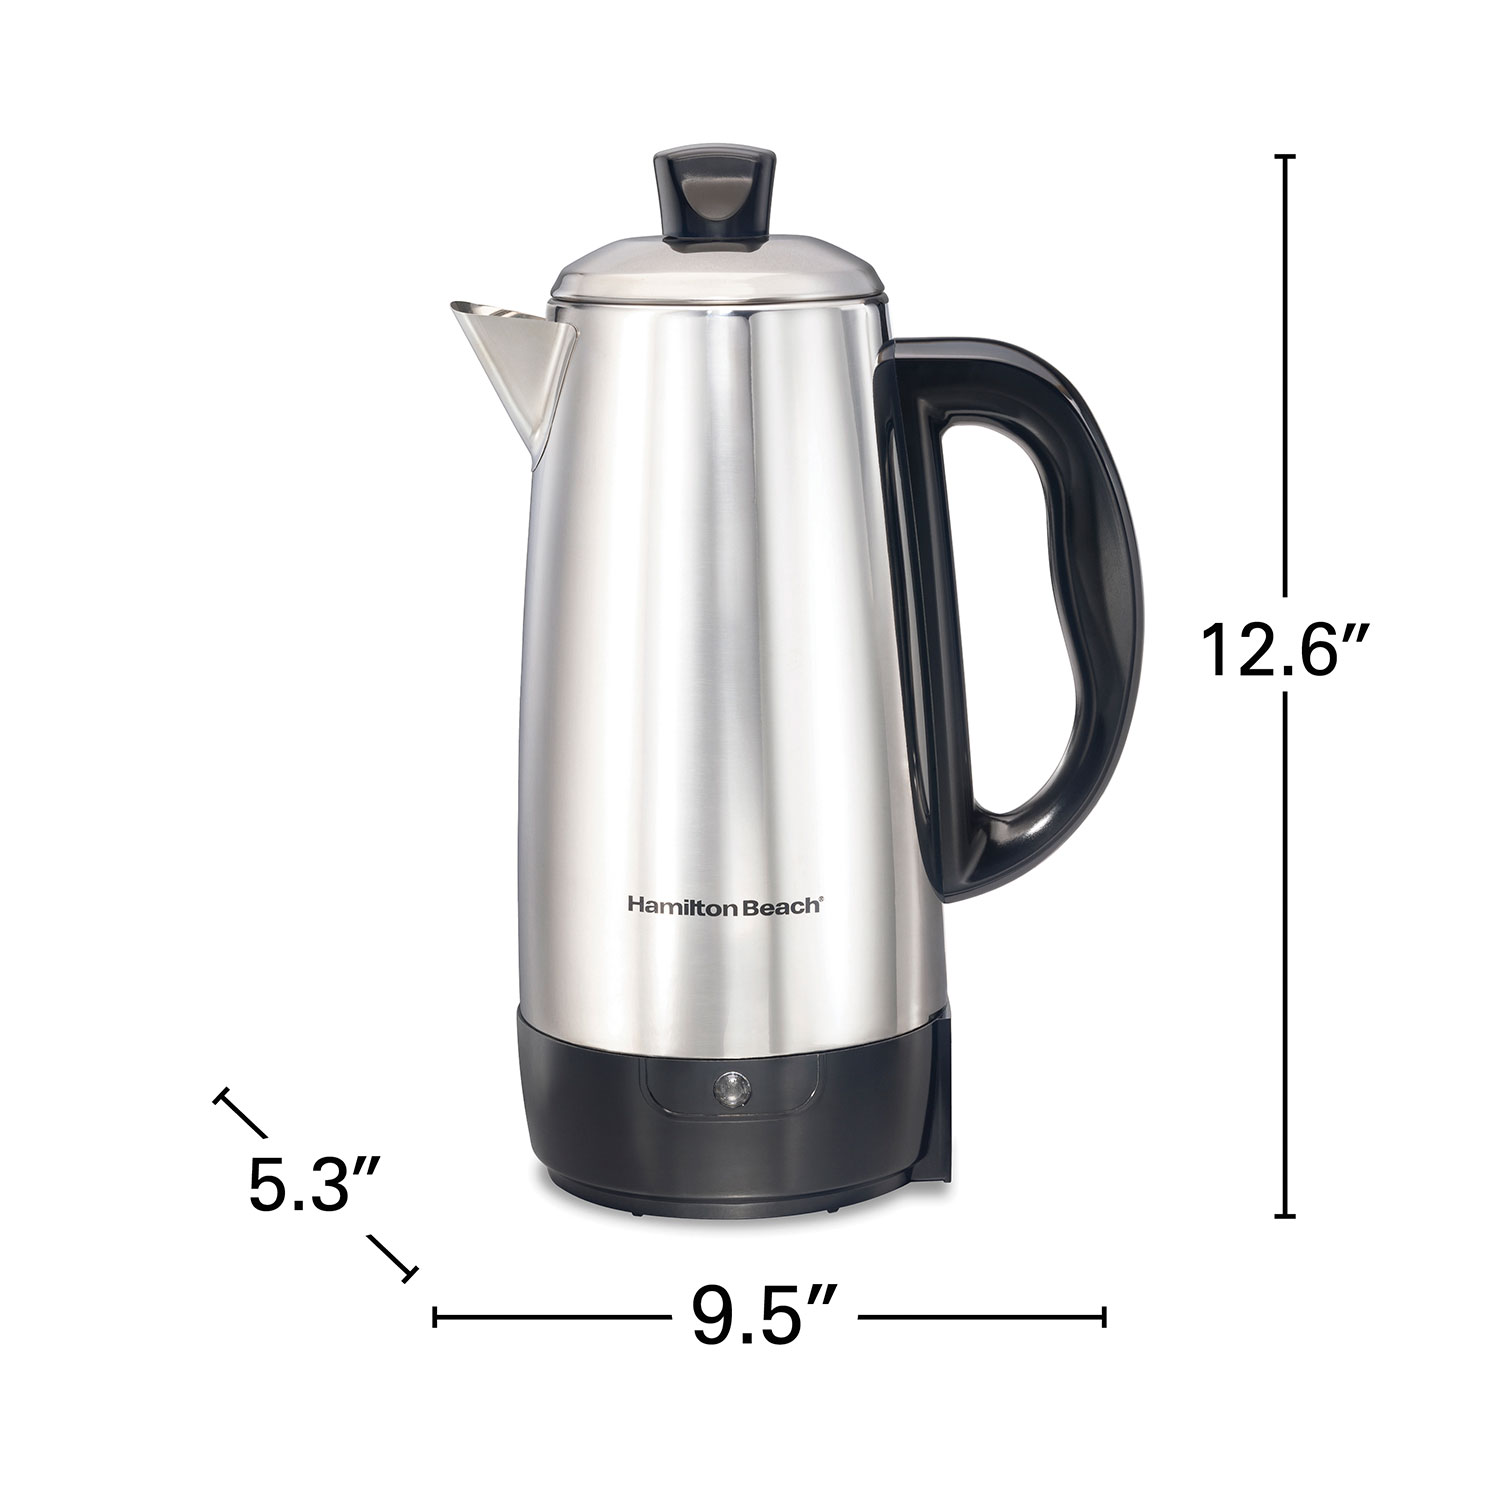  Hamilton Beach 12 Cup Electric Percolator Coffee Maker with  Cool Touch Handle, Vintage Spout, Stainless Steel: Electric Coffee  Percolators: Home & Kitchen